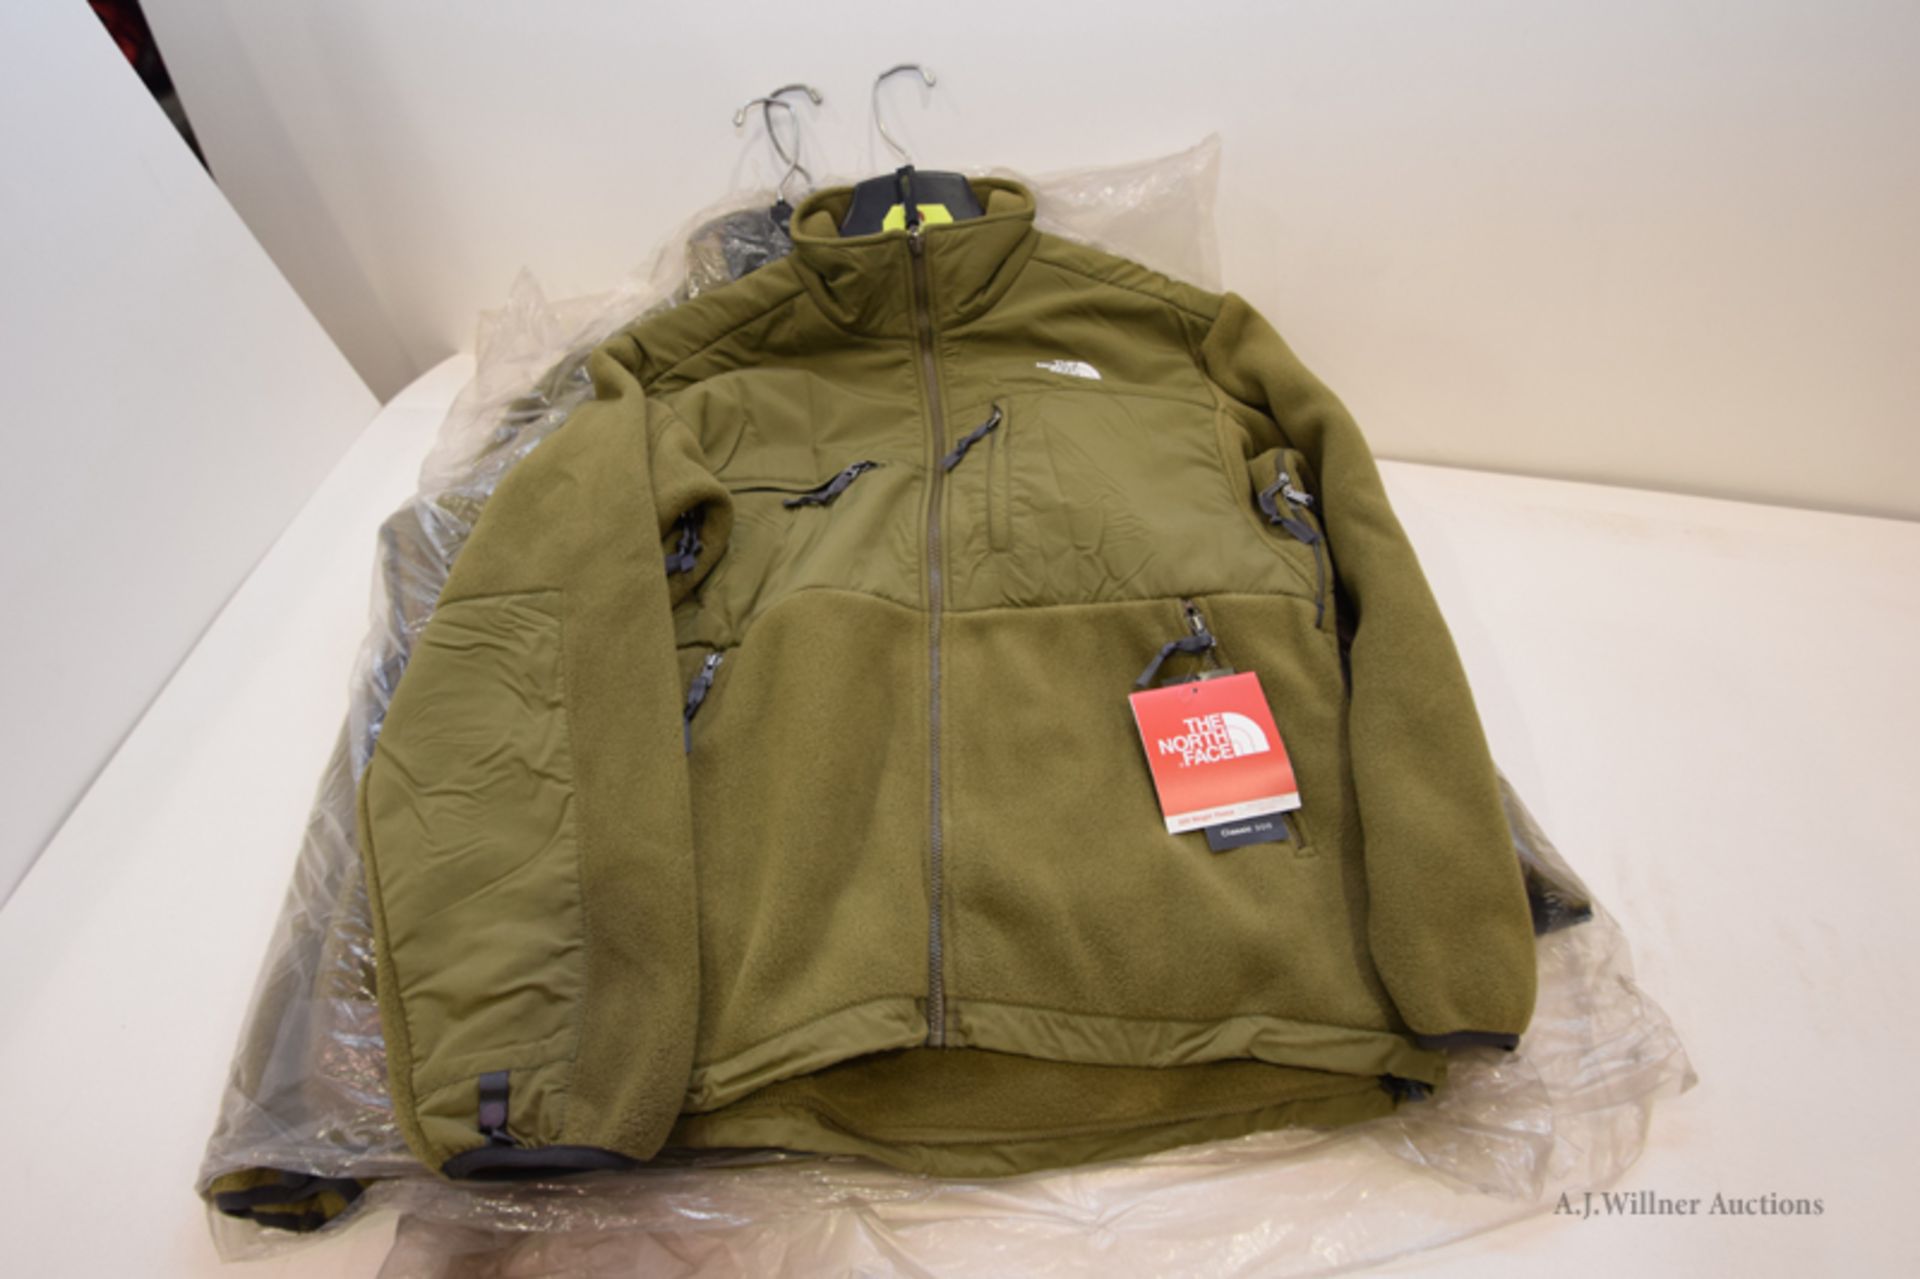 The North Face Clothing - Image 4 of 6